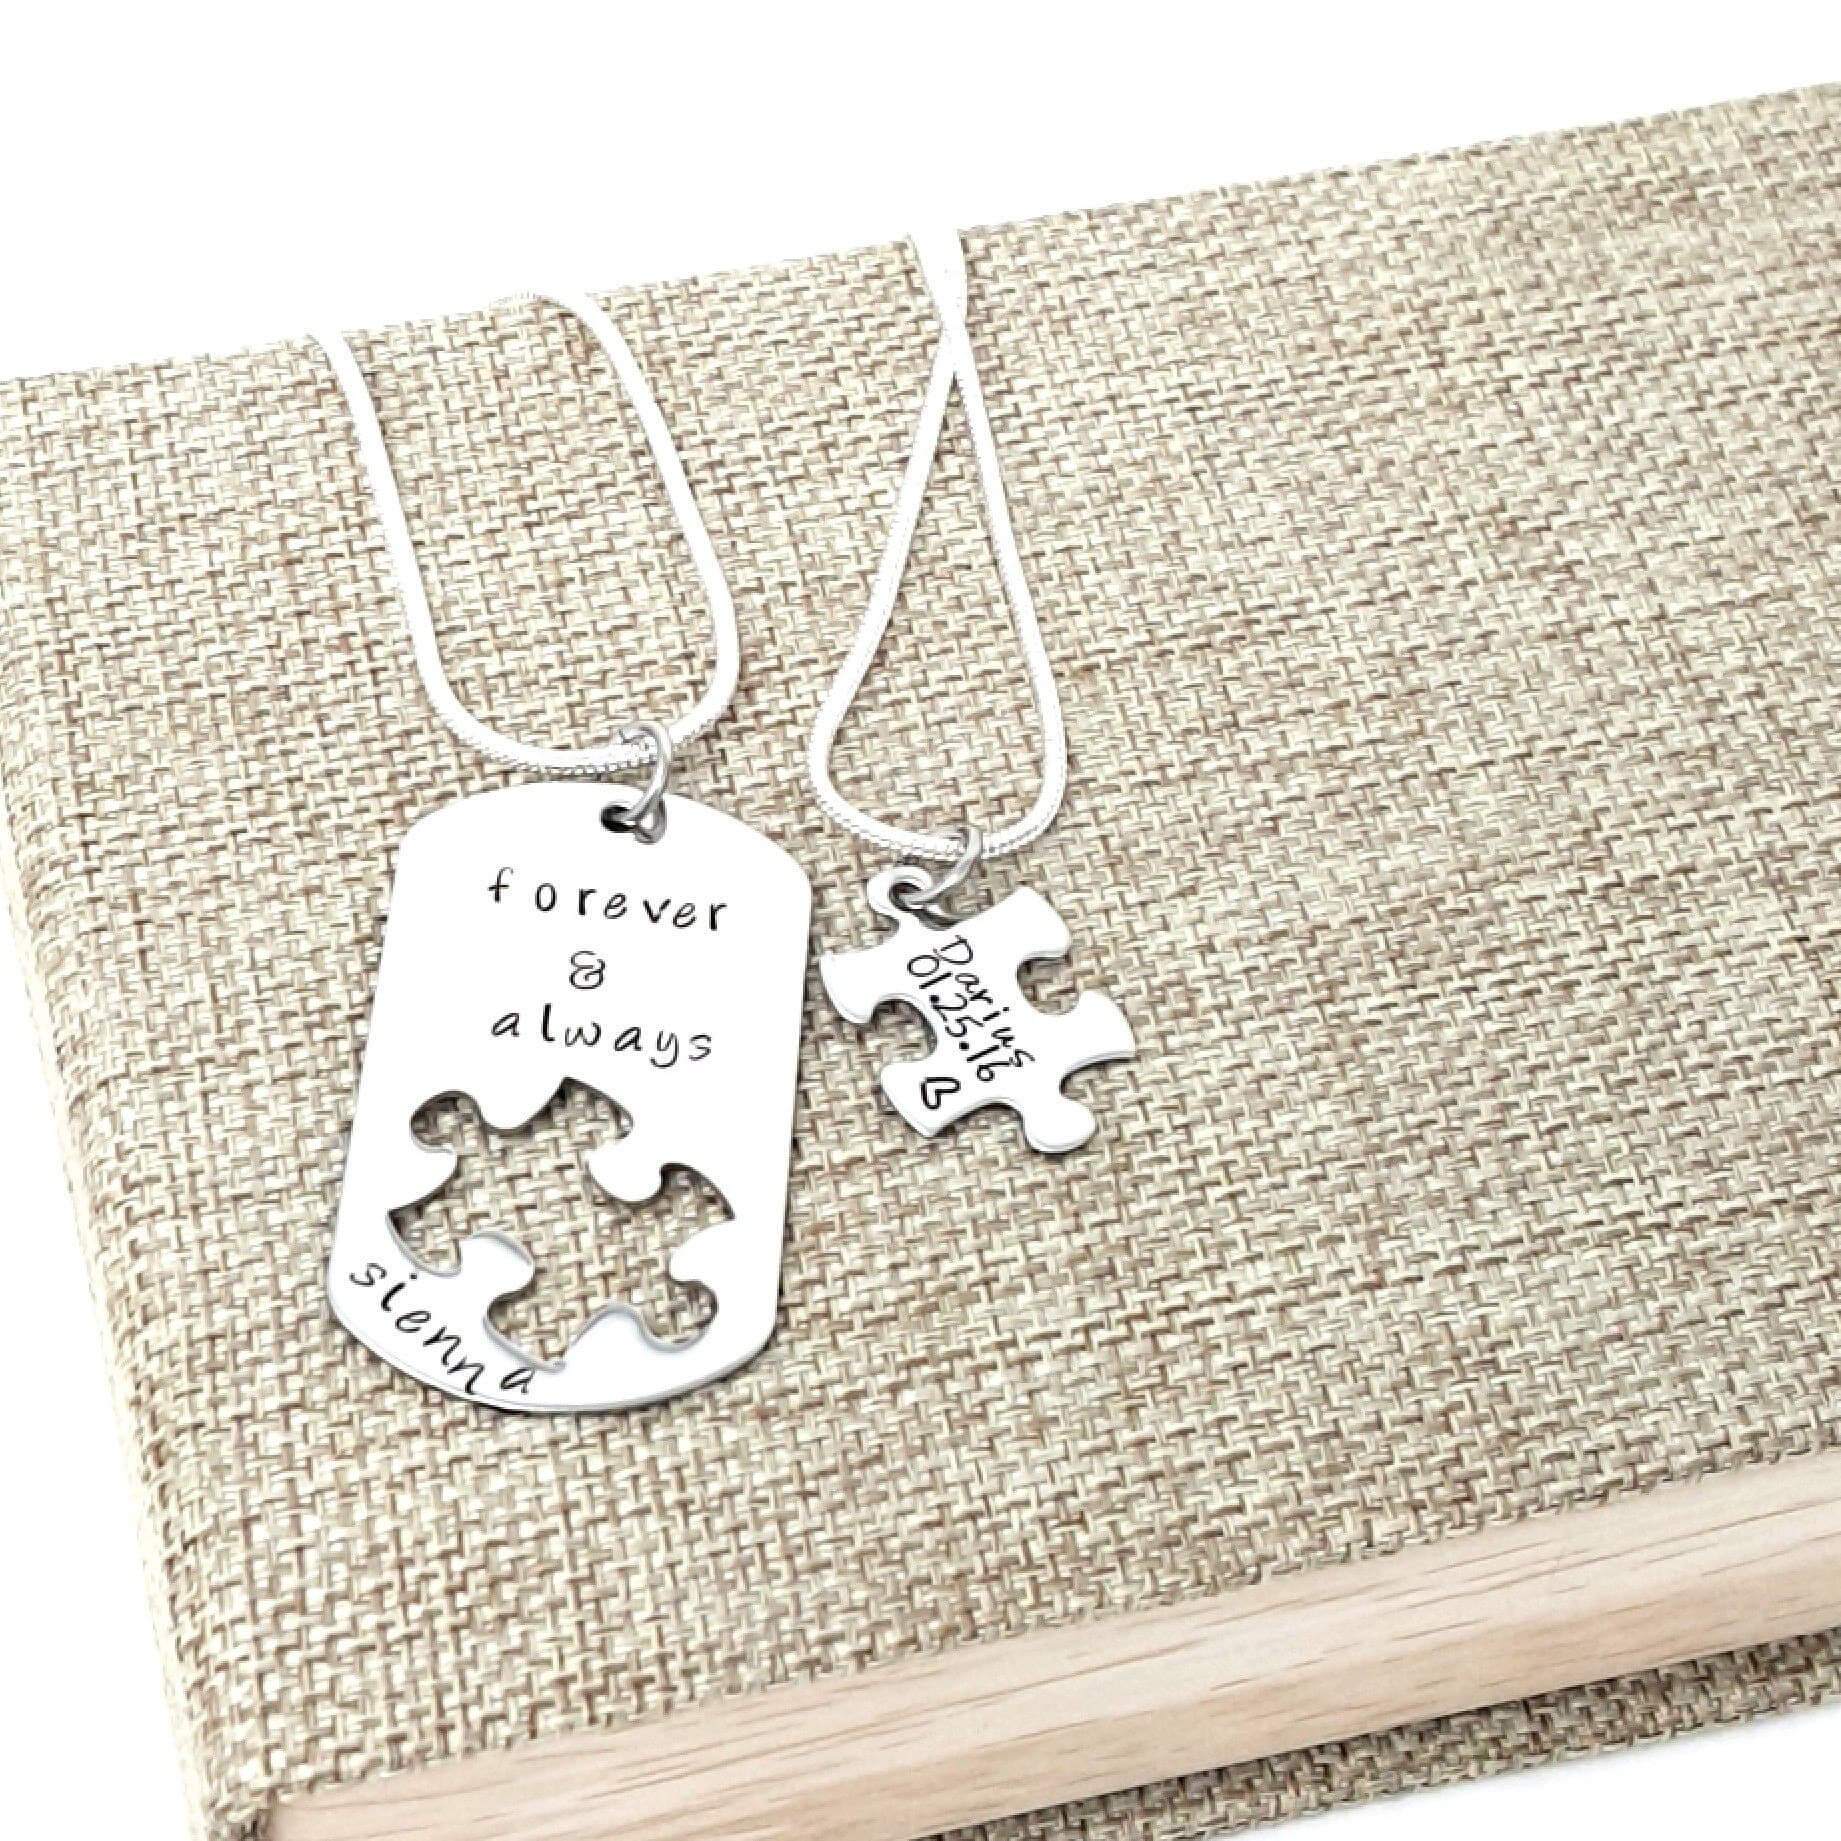 Forever and Always Necklace Set, Puzzle Piece, Dog Tag Necklace, Boyfriend Gift, Forever and Ever, Necklaces, HandmadeLoveStories, HandmadeLoveStories , [Handmade_Love_Stories], [Hand_Stamped_Jewelry], [Etsy_Stamped_Jewelry], [Etsy_Jewelry]